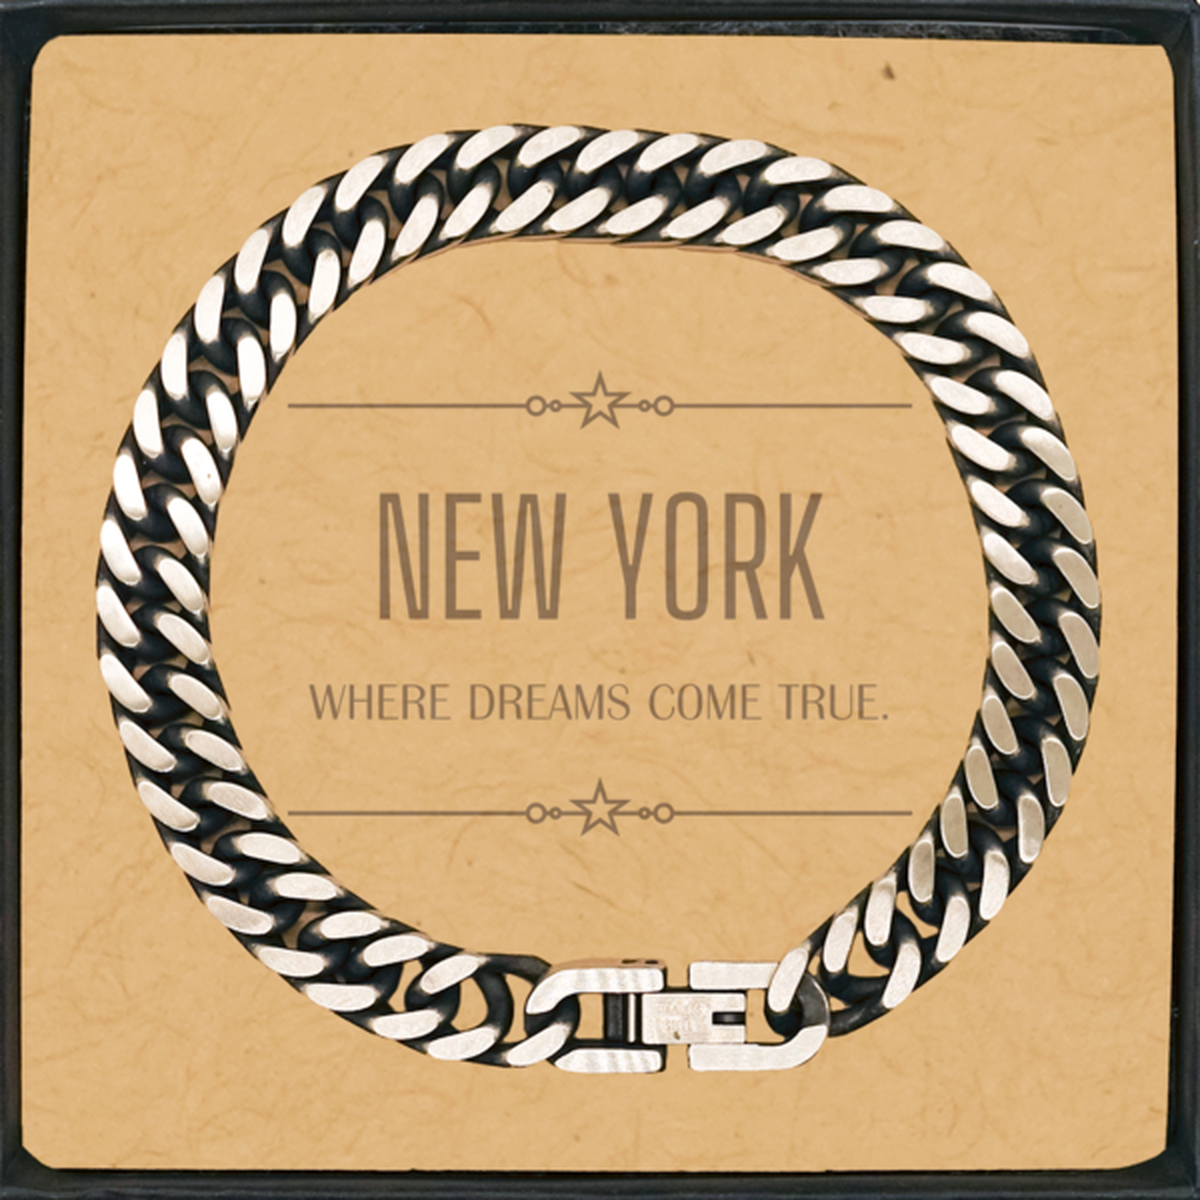 Love New York State Cuban Link Chain Bracelet, New York Where dreams come true, Birthday Inspirational Gifts For New York Men, Women, Friends